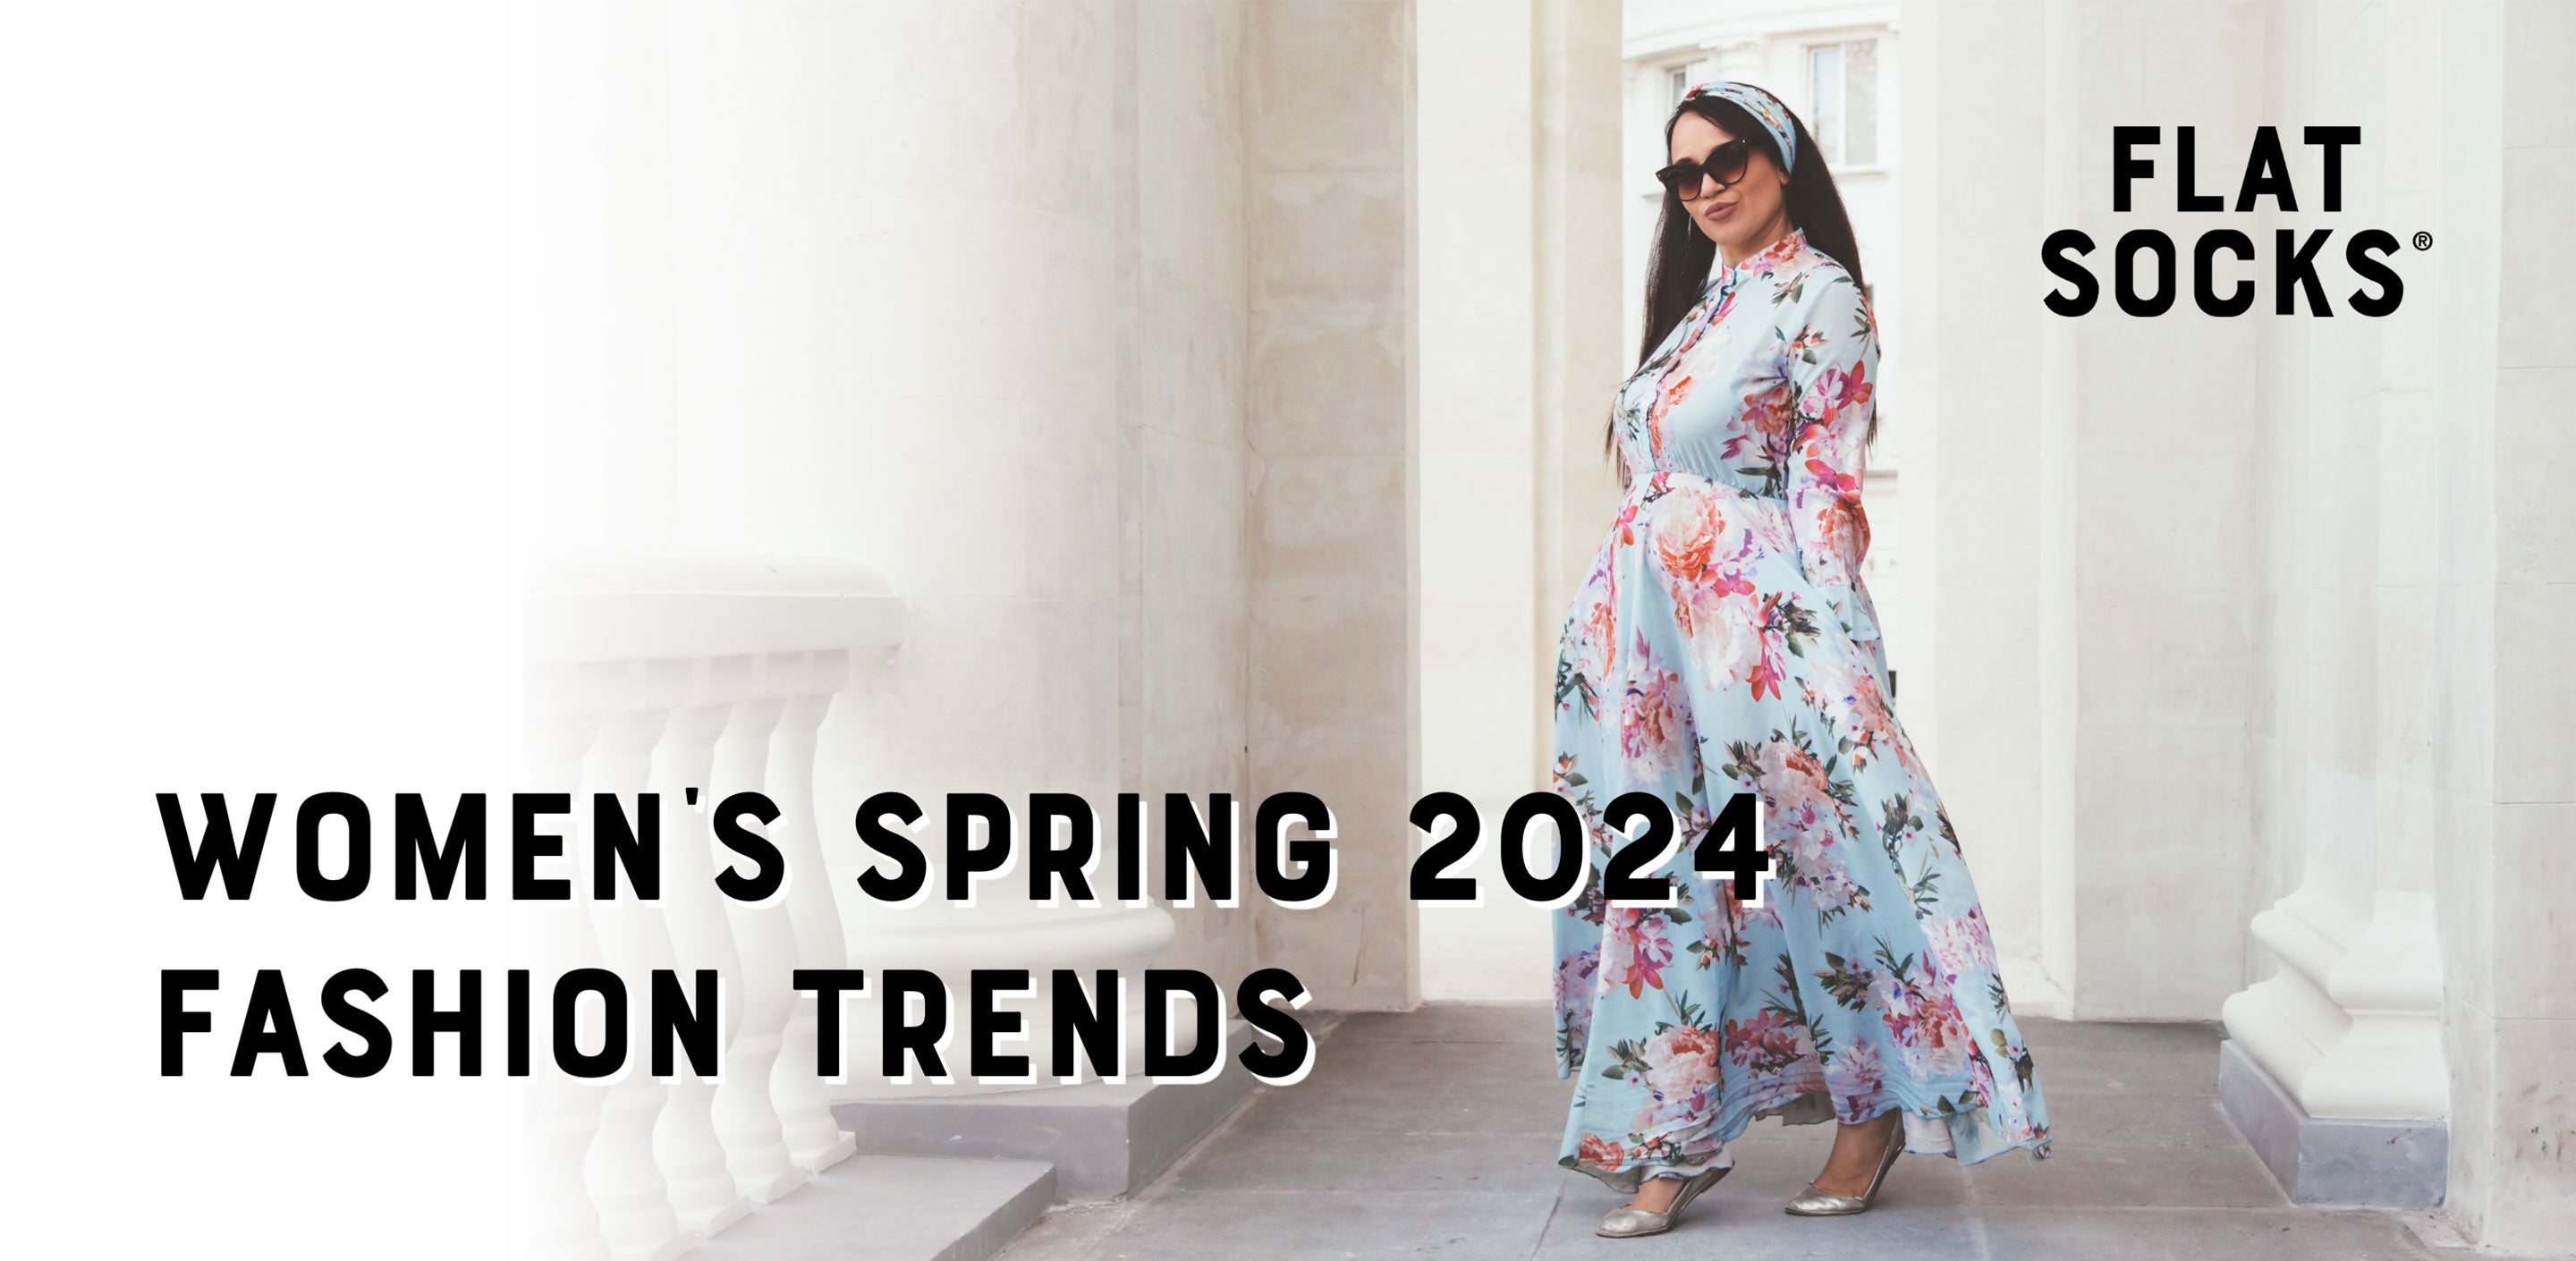 Women’s Spring Fashion Trends & How to Style Them by FLAT SOCKS